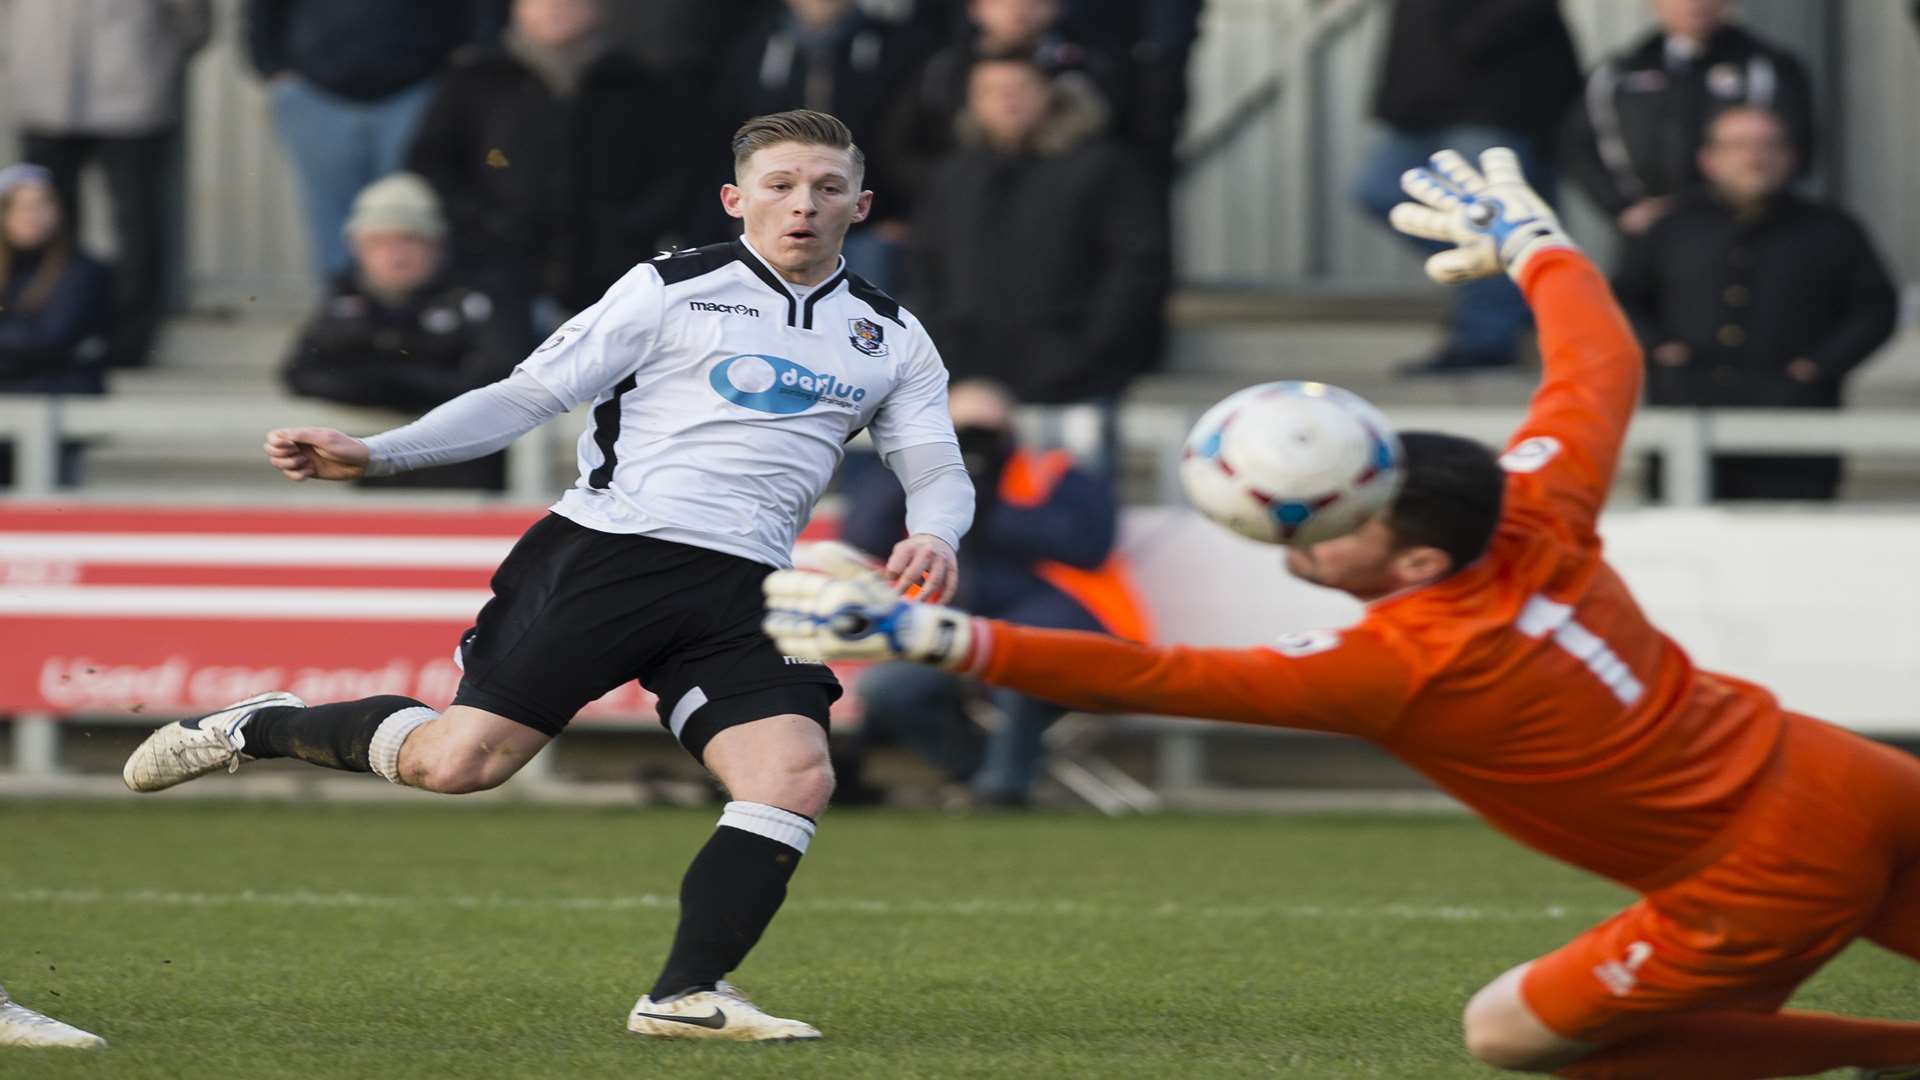 Andy Pugh opens the scoring in Dartford's 4-2 win over Bath City Picture: Andy Payton